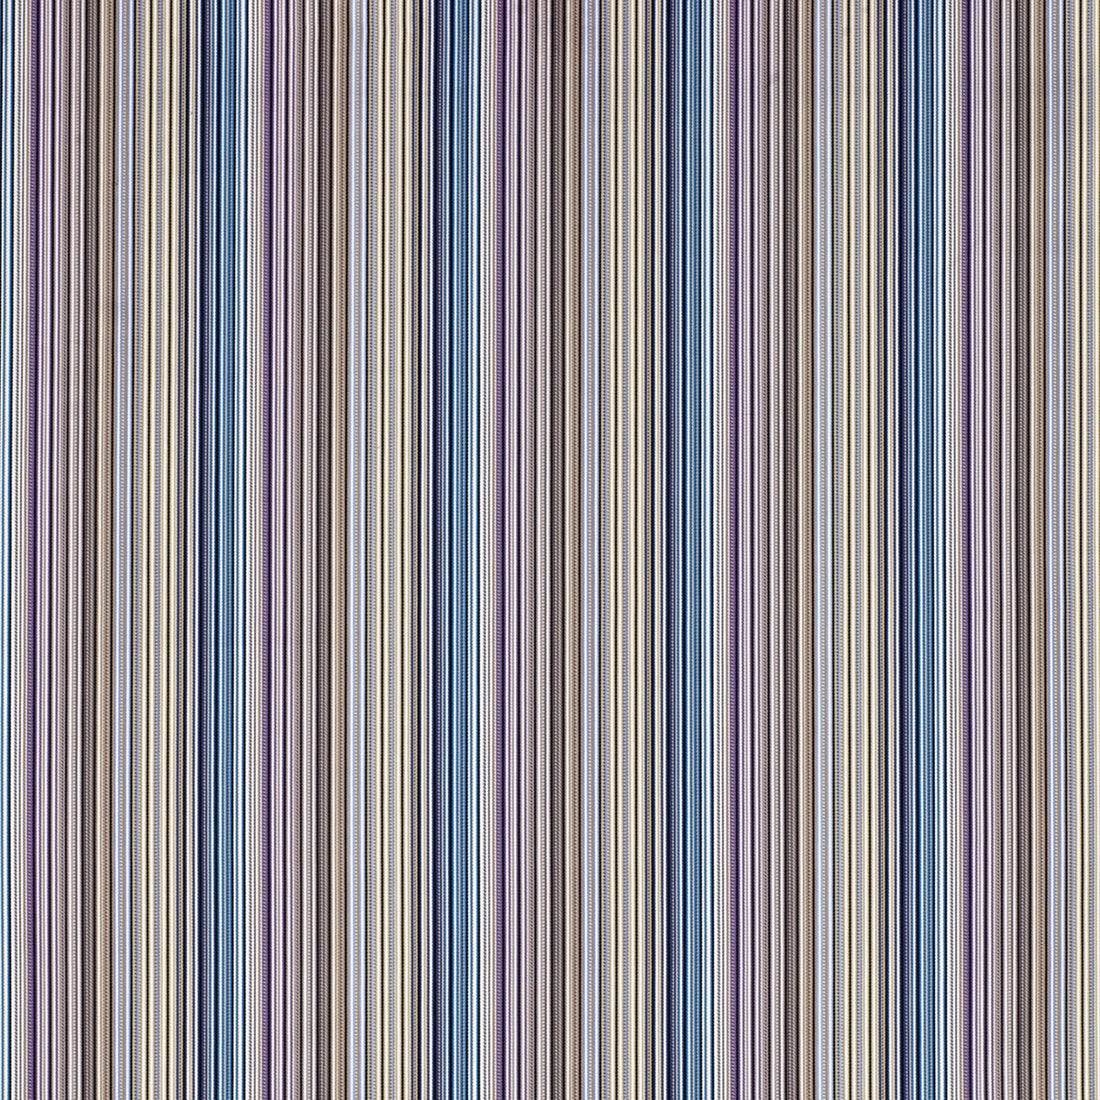 Jenkins fabric in 150 color - pattern 36163.635.0 - by Kravet Couture in the Missoni Home collection